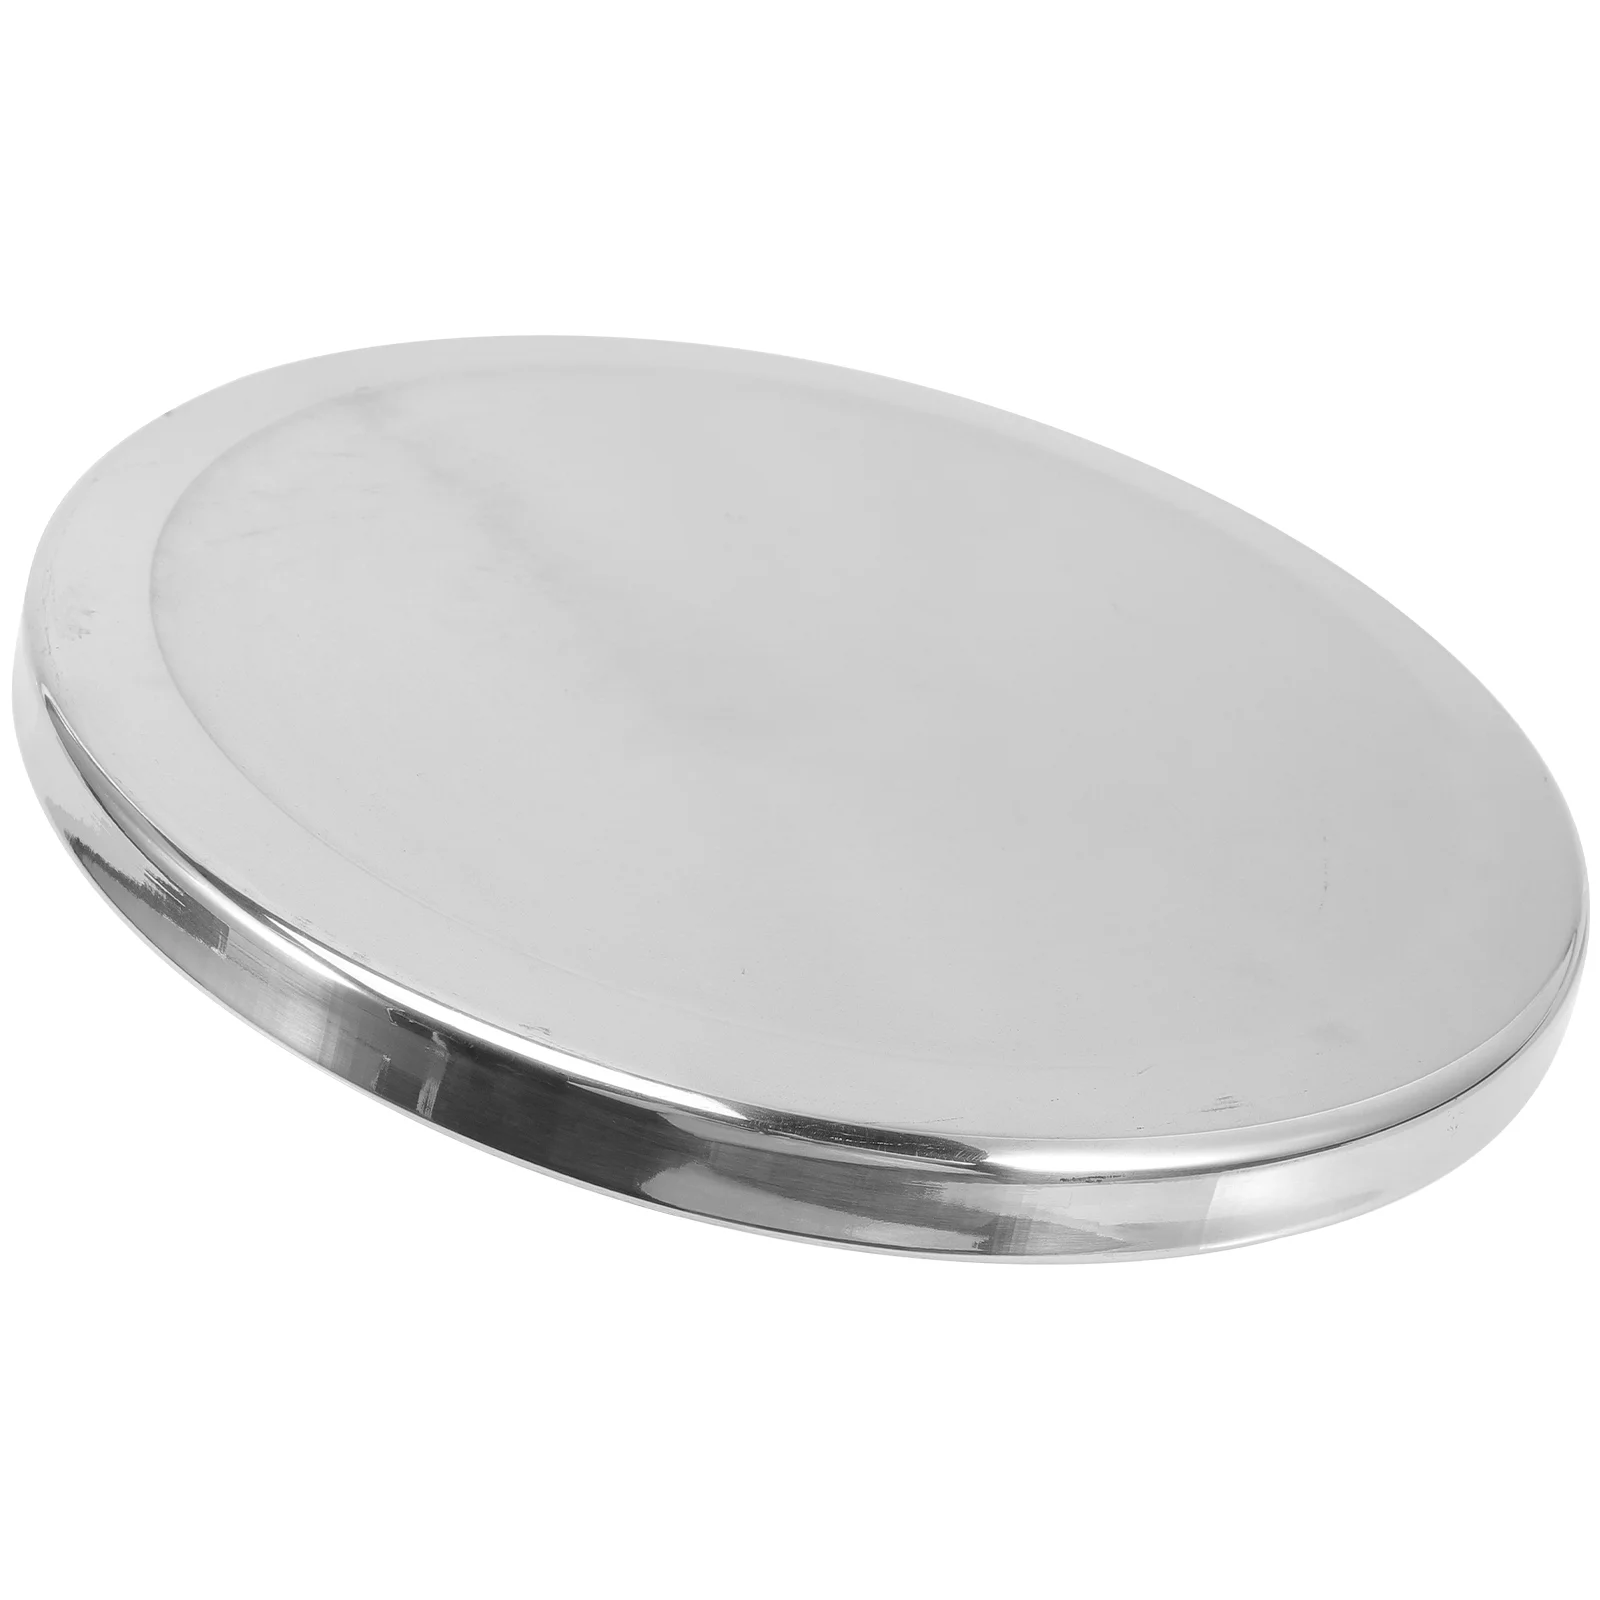 

Chair Seat Stool Round Seating Bar Part Replacement Metal Door Stainless Steel Lock Shed Canteen Home Pad Cushion Cover